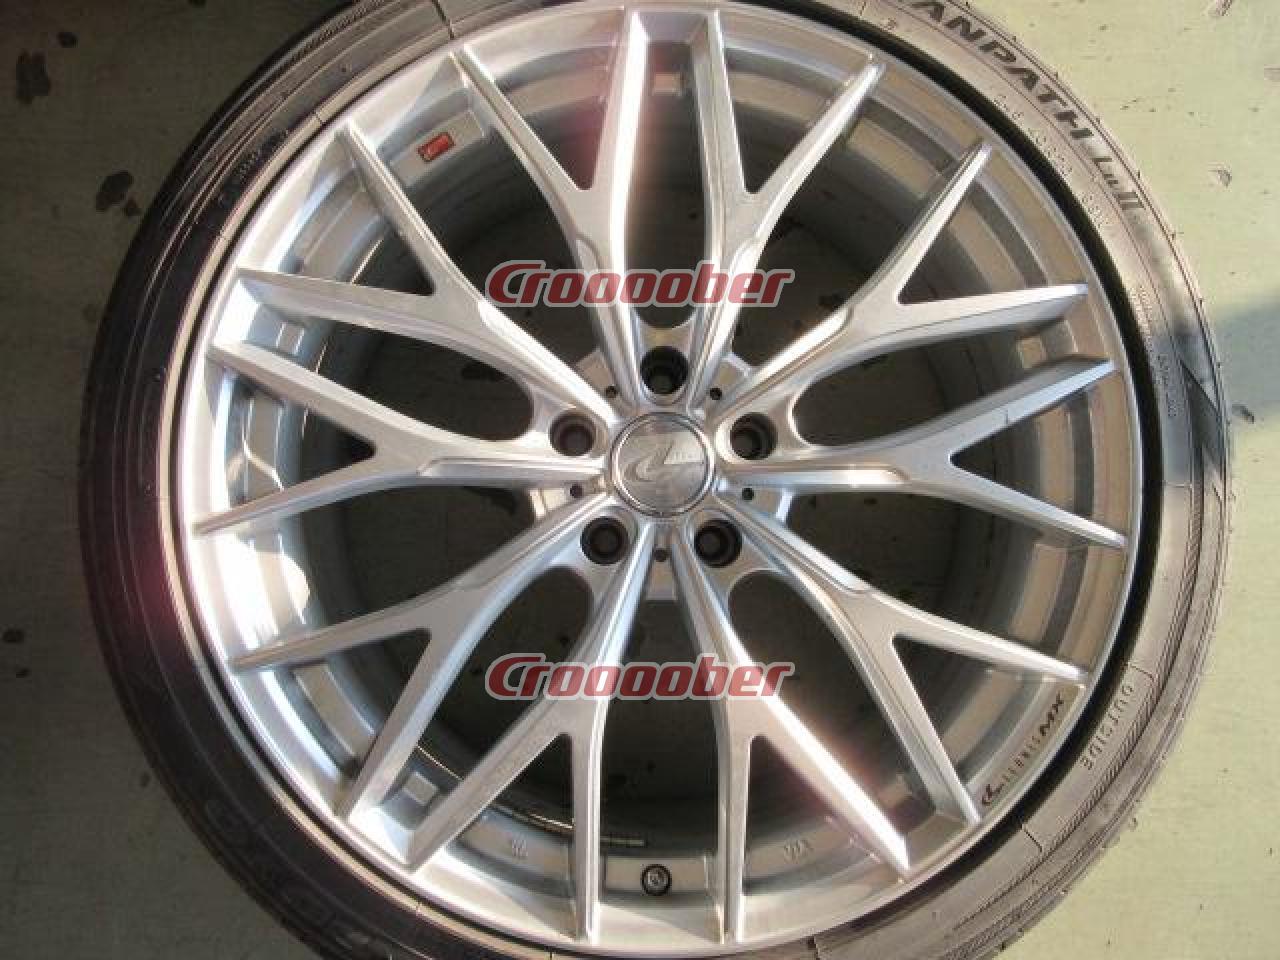 Weds LEONIS MX [This Is Sale Of The Wheel Only] - 8.5Jx20+35114.3 